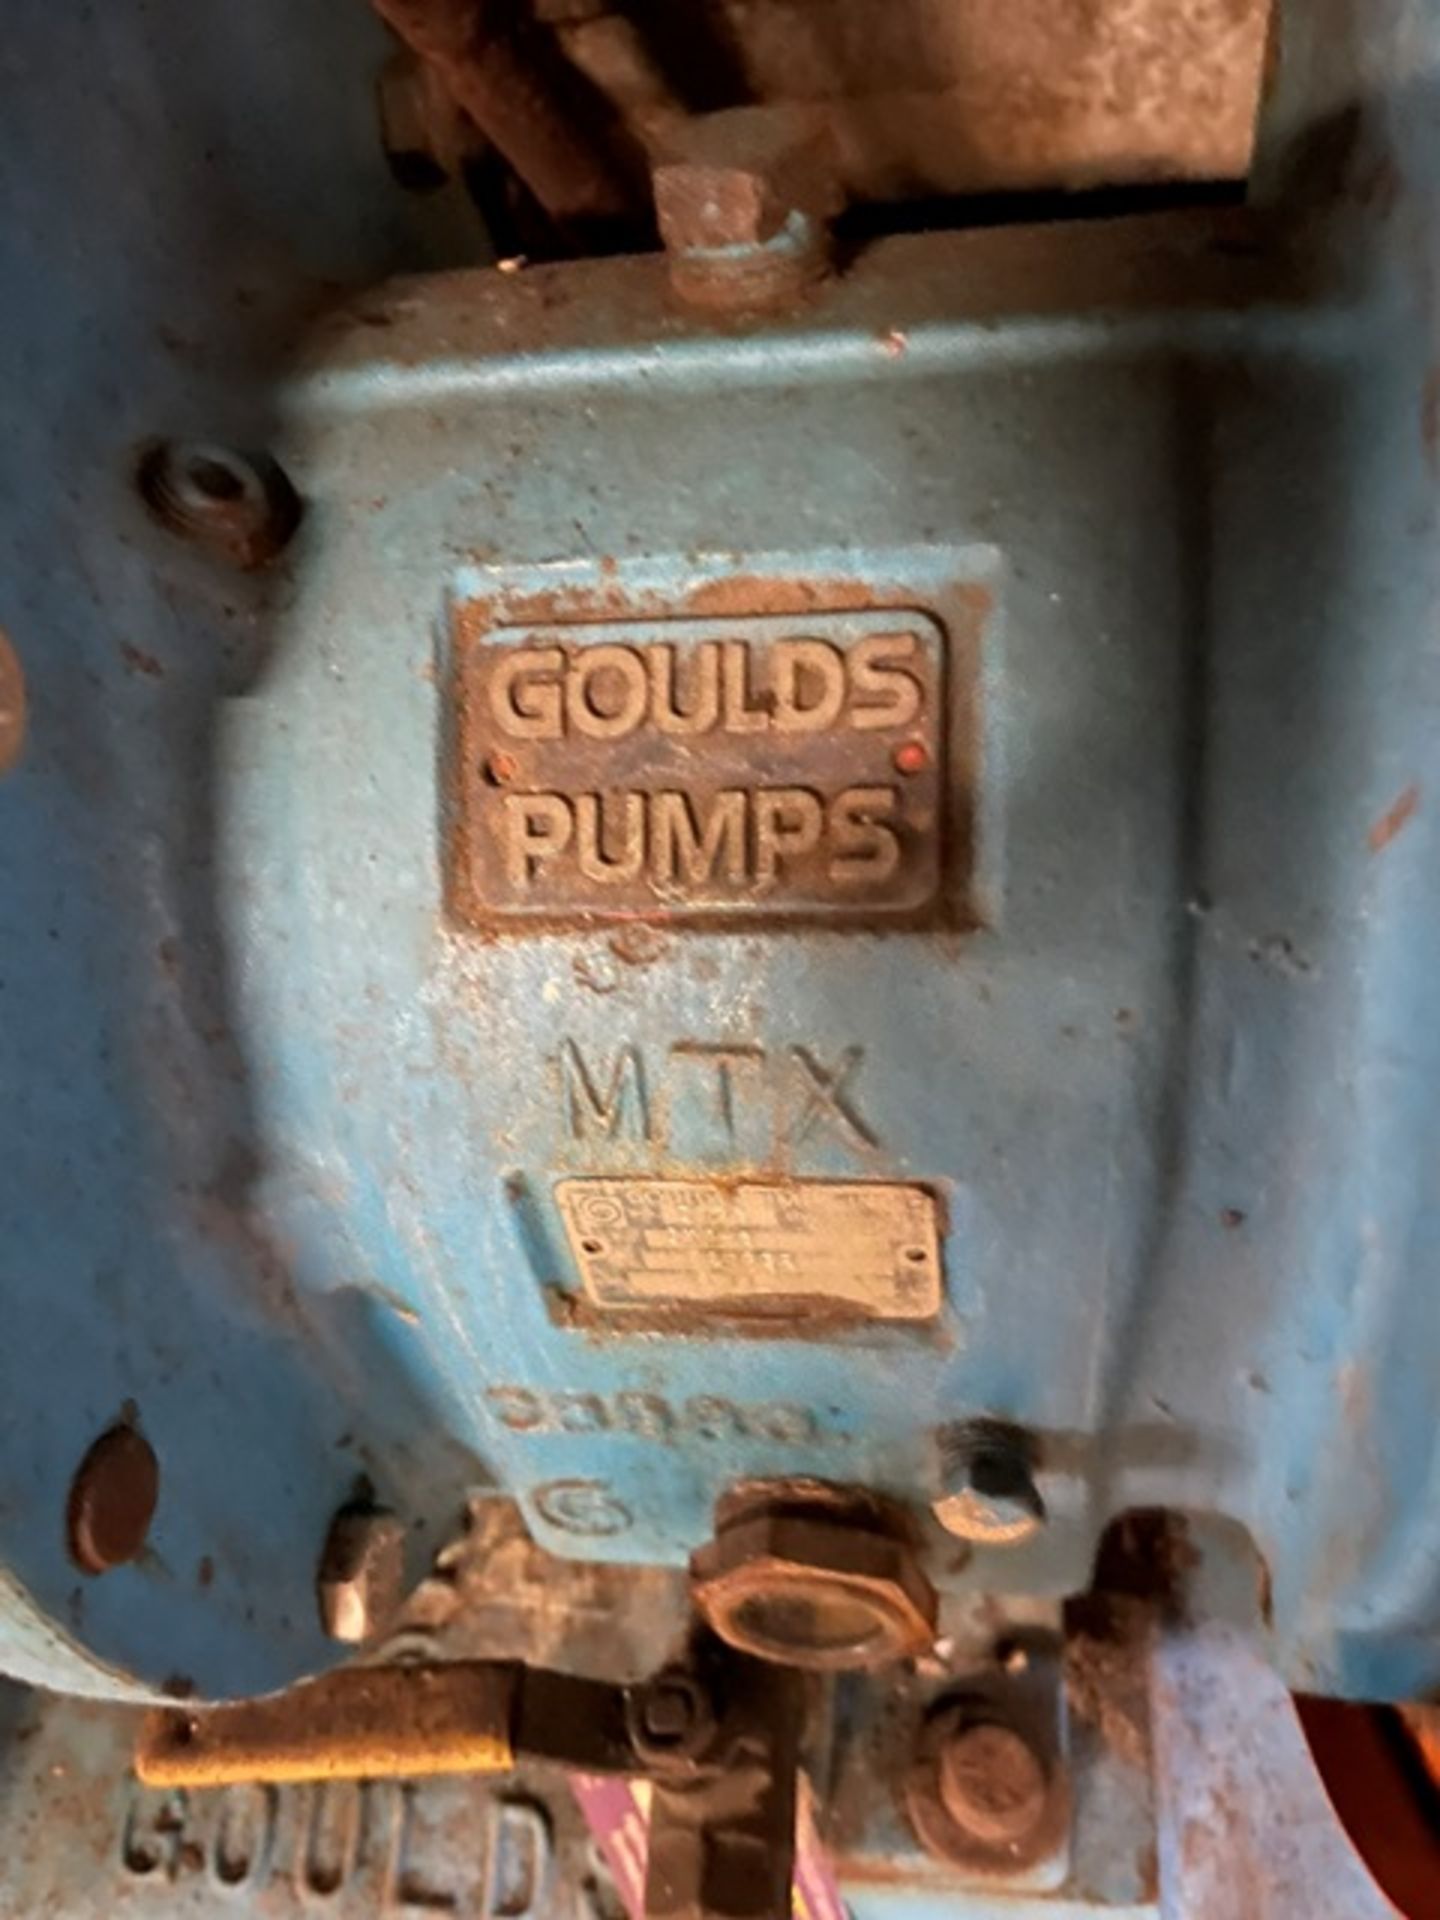 General Electric 7.5 HP Motor & Goulds MTX Pump, Rigging & Loading Fee: $300 - Image 2 of 3